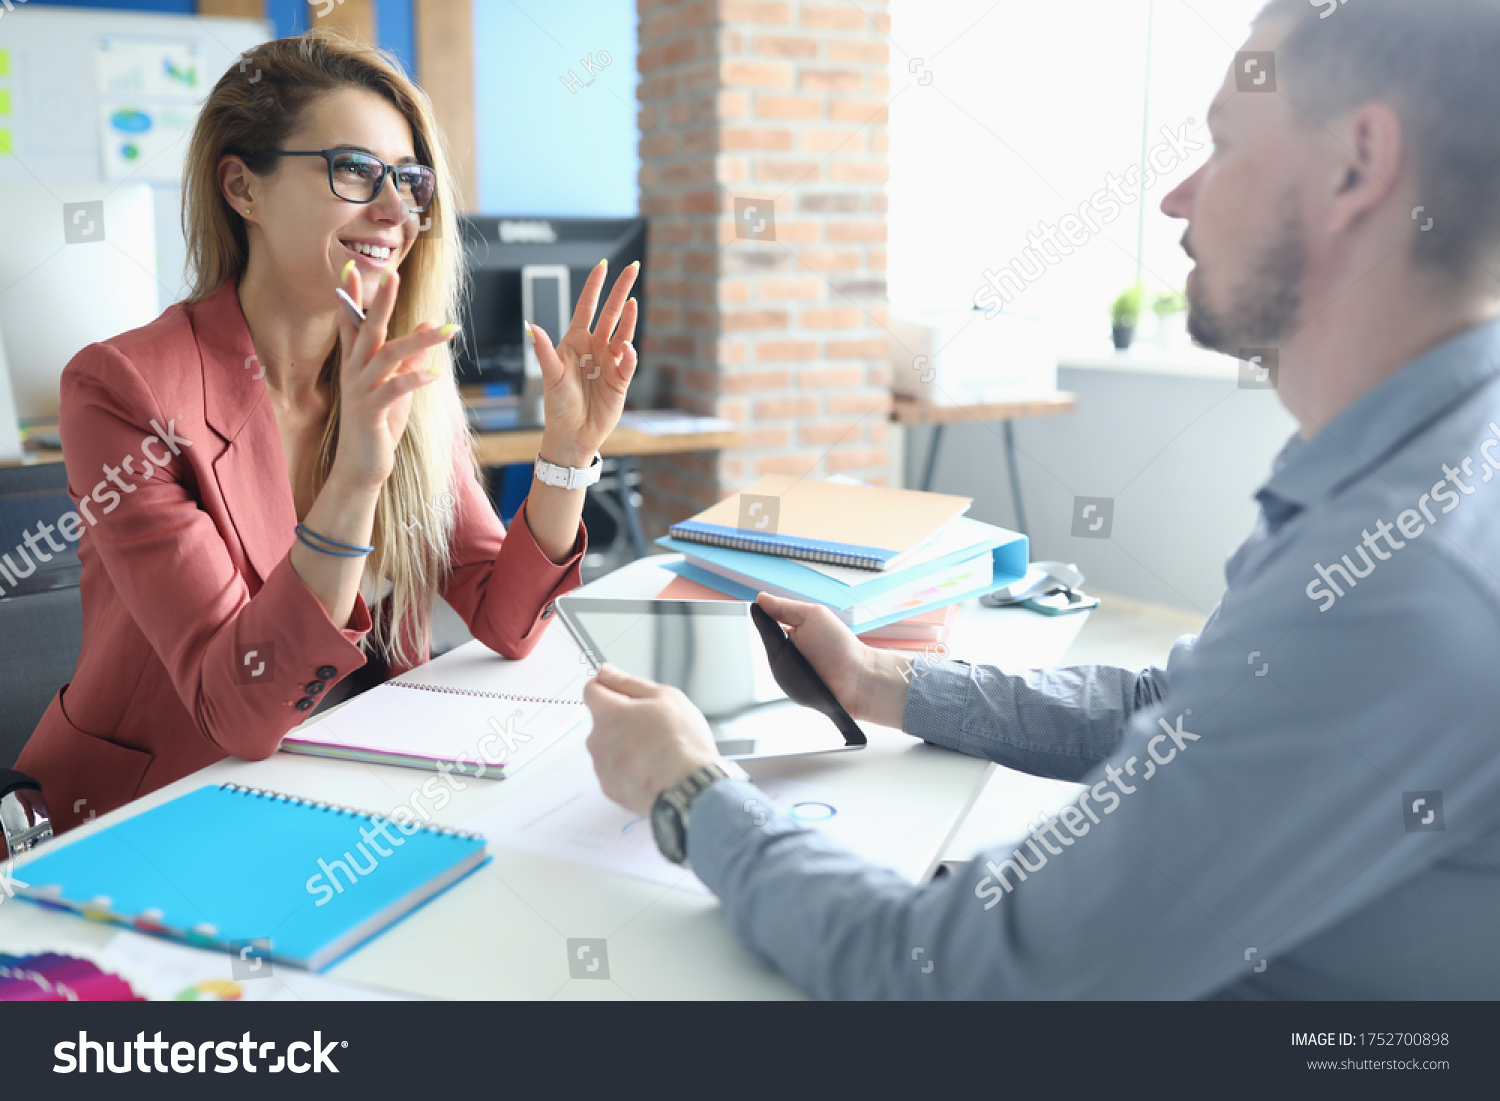 Two adult business people make work interview against office background.One on one meeting concept. #1752700898